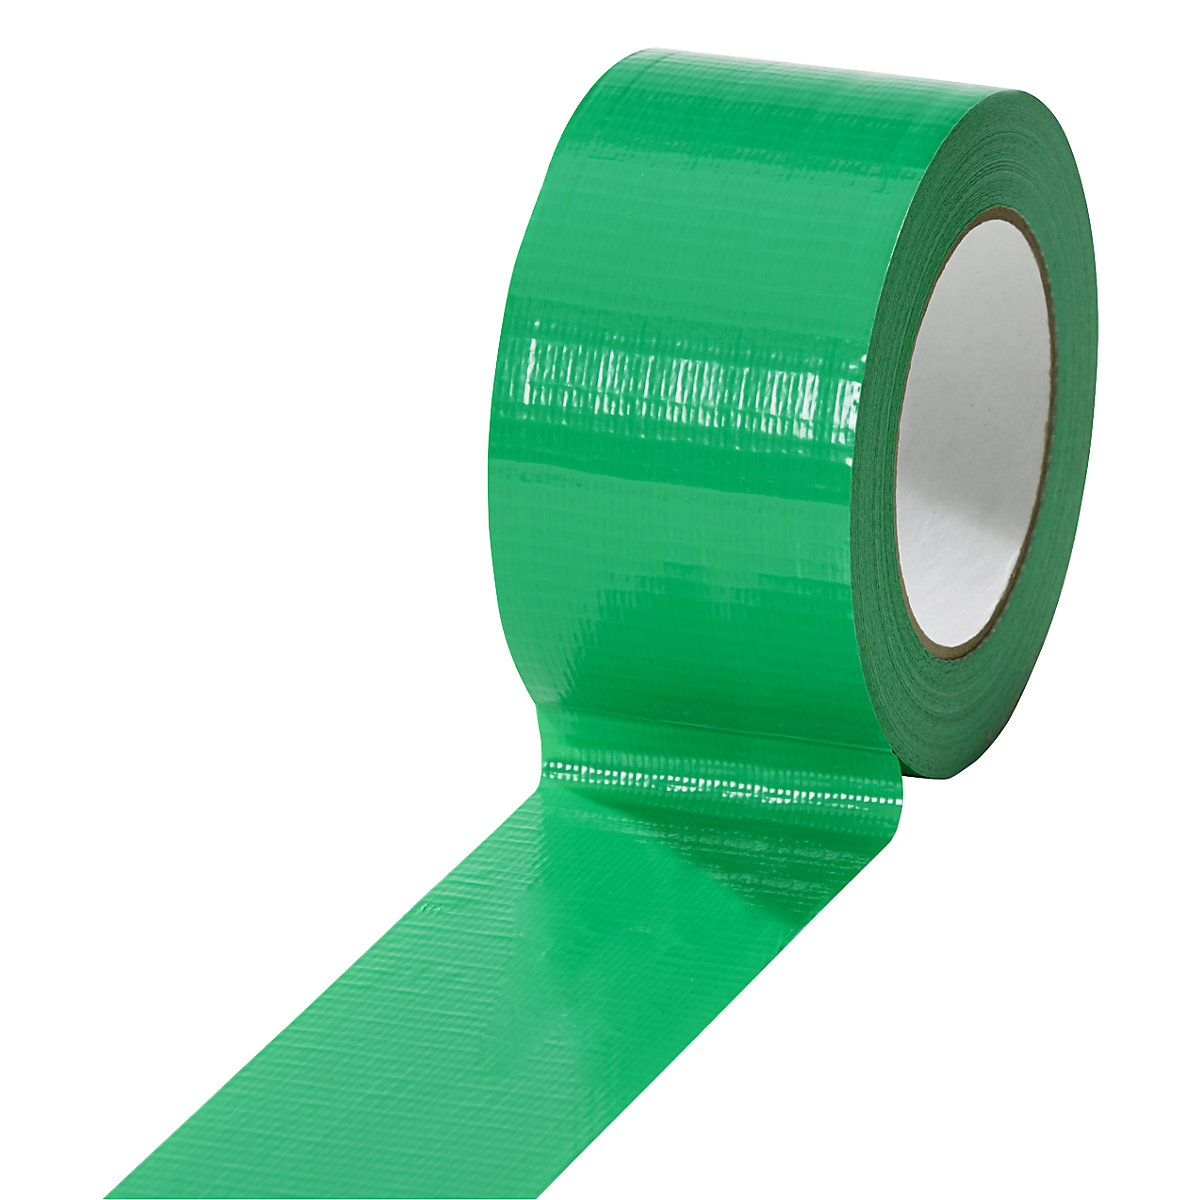 Fabric tape, in different colours, pack of 18 rolls, green, tape width 50 mm-15